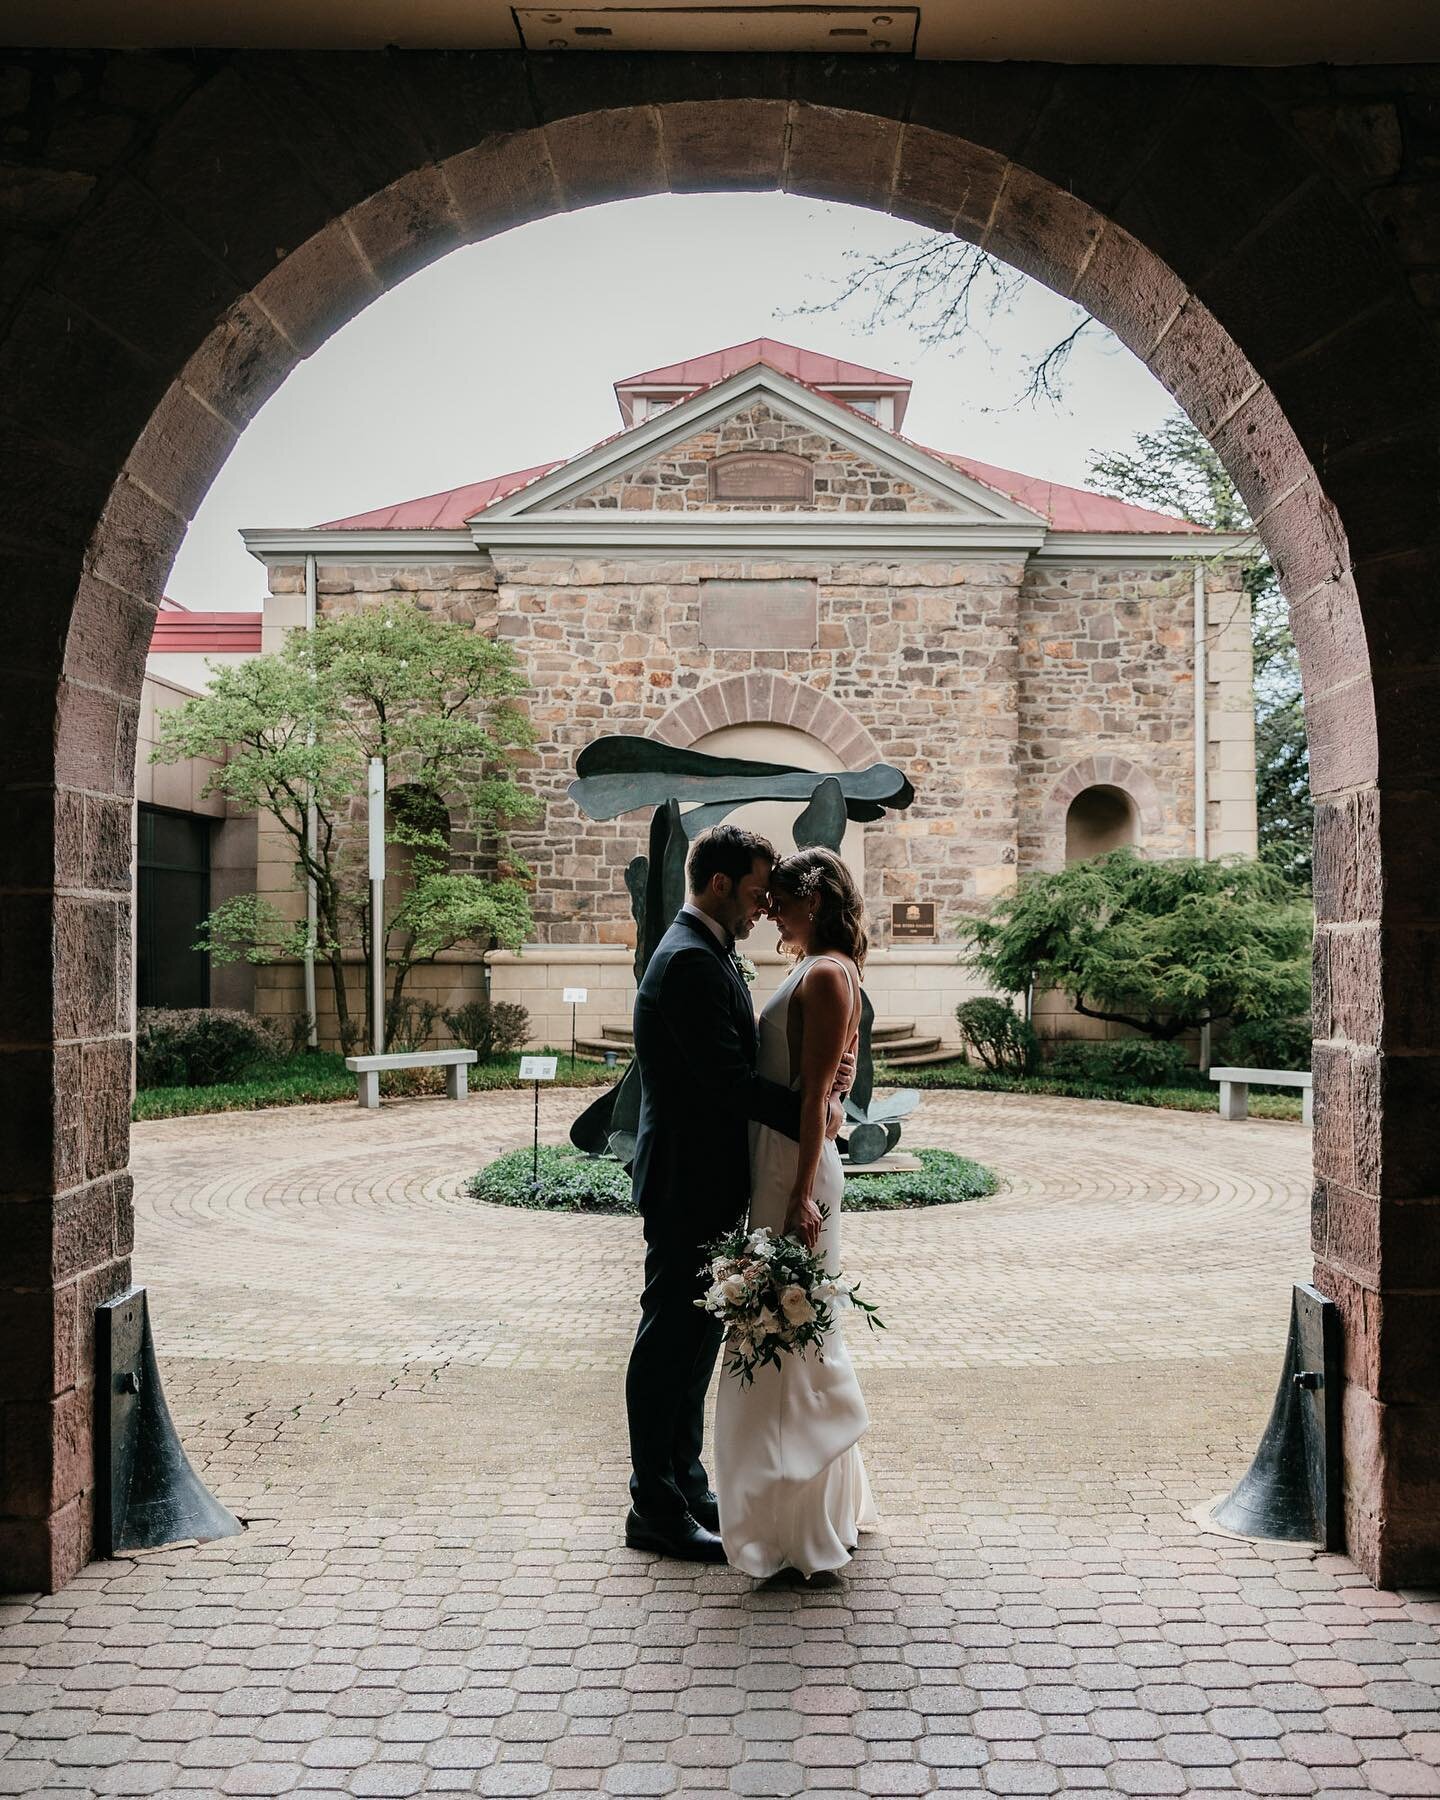 Capturing the details of Abby + Alex's wedding at the James A. Michener Museum. Every corner of this venue spoke of art, culture, and timeless beauty. What a stunning backdrop for this  wedding to unfold. 🌧️⁠
⁠
Photographer: @alexmihalceaphotography